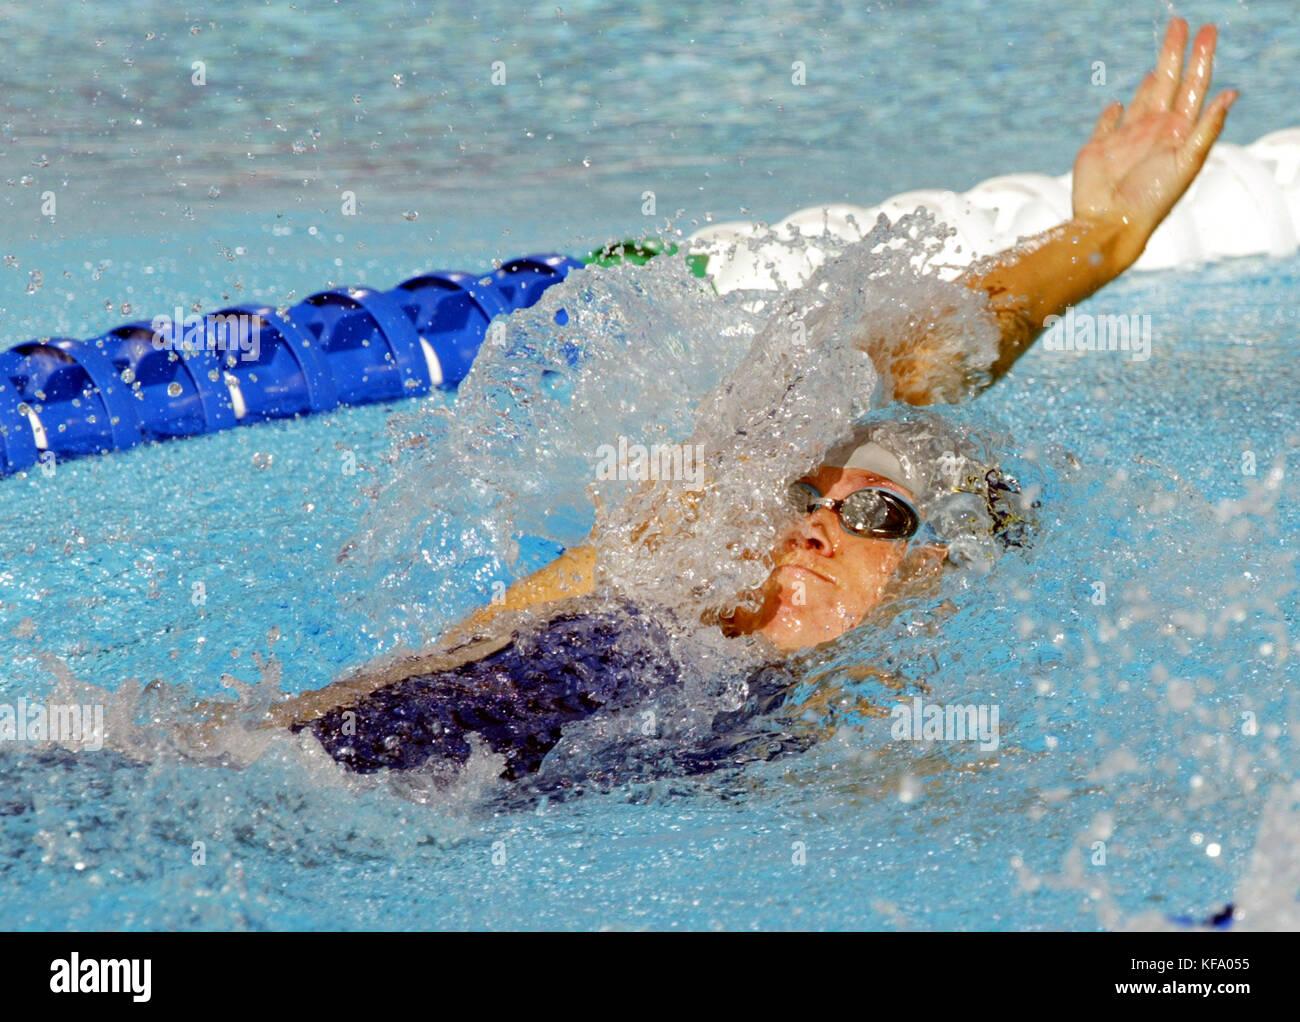 US swimmer Natalie Coughlin during her victory in  the women's 100 meter backstroke at the U.S. Olympic Swimming Trials in Long Beach, California on 09 July 2004. Coughlin won in a time of 59.85. Photo by Francis Specker Stock Photo